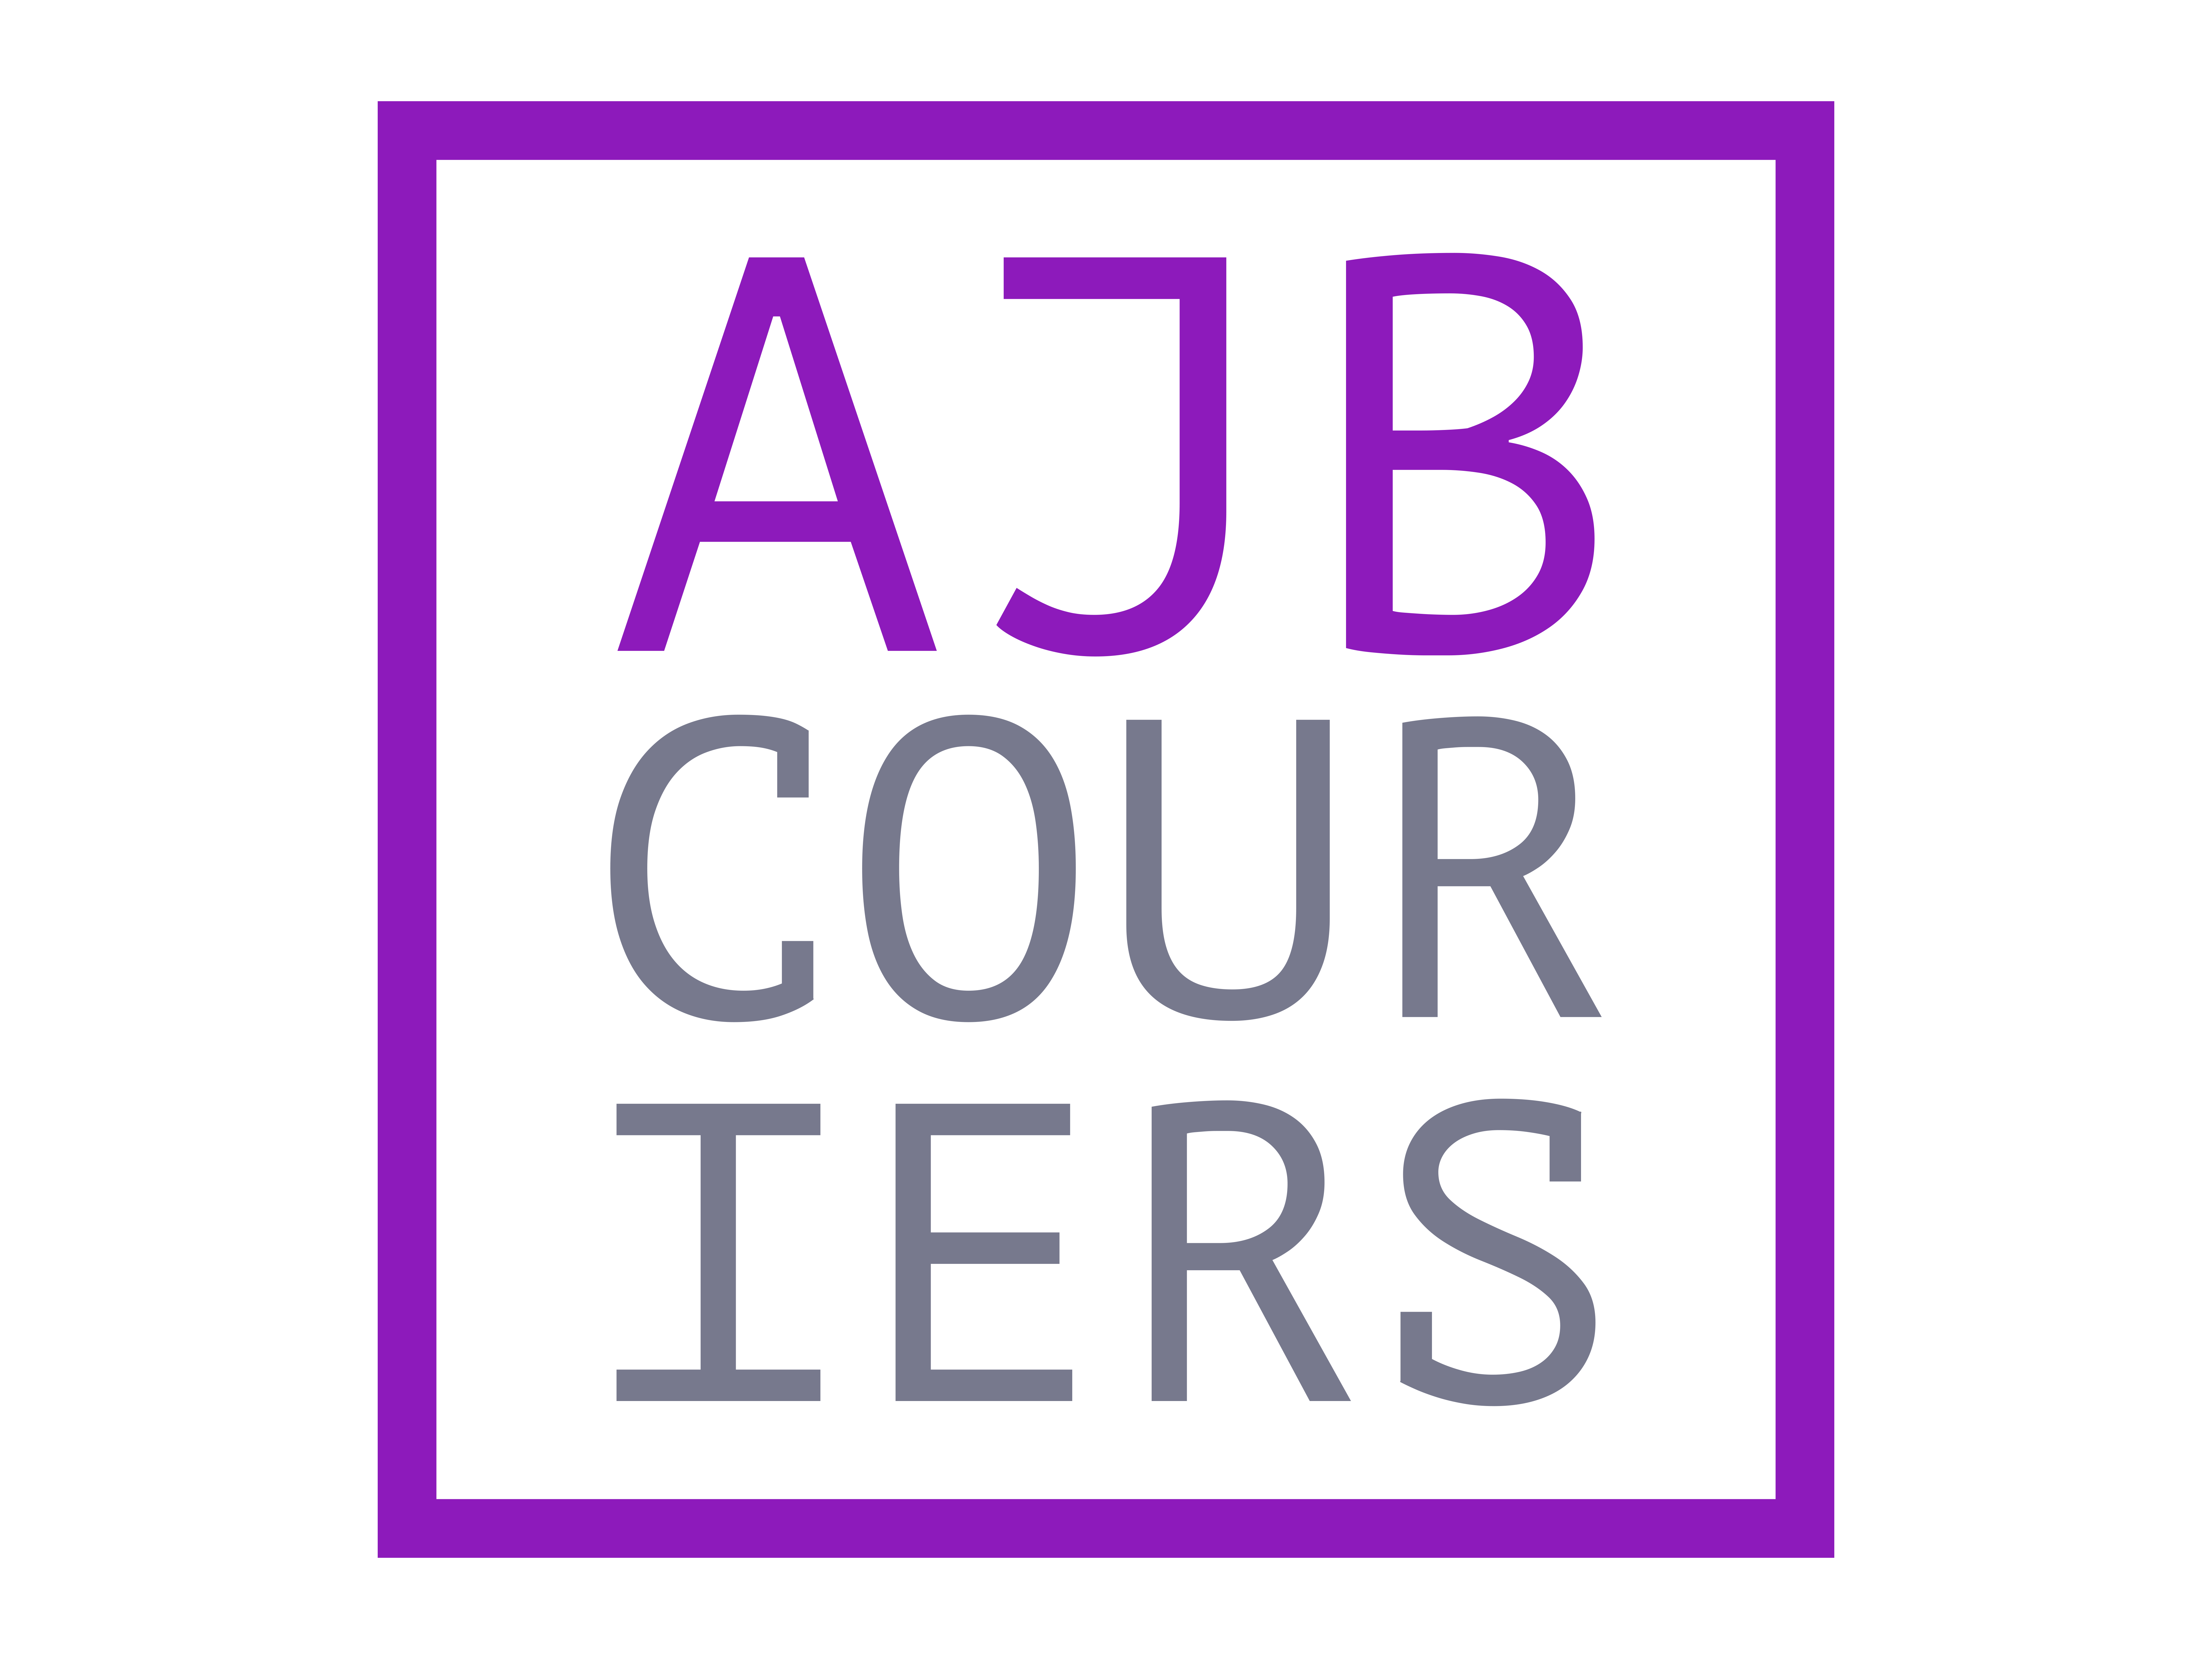 (c) Ajbcouriers.co.uk